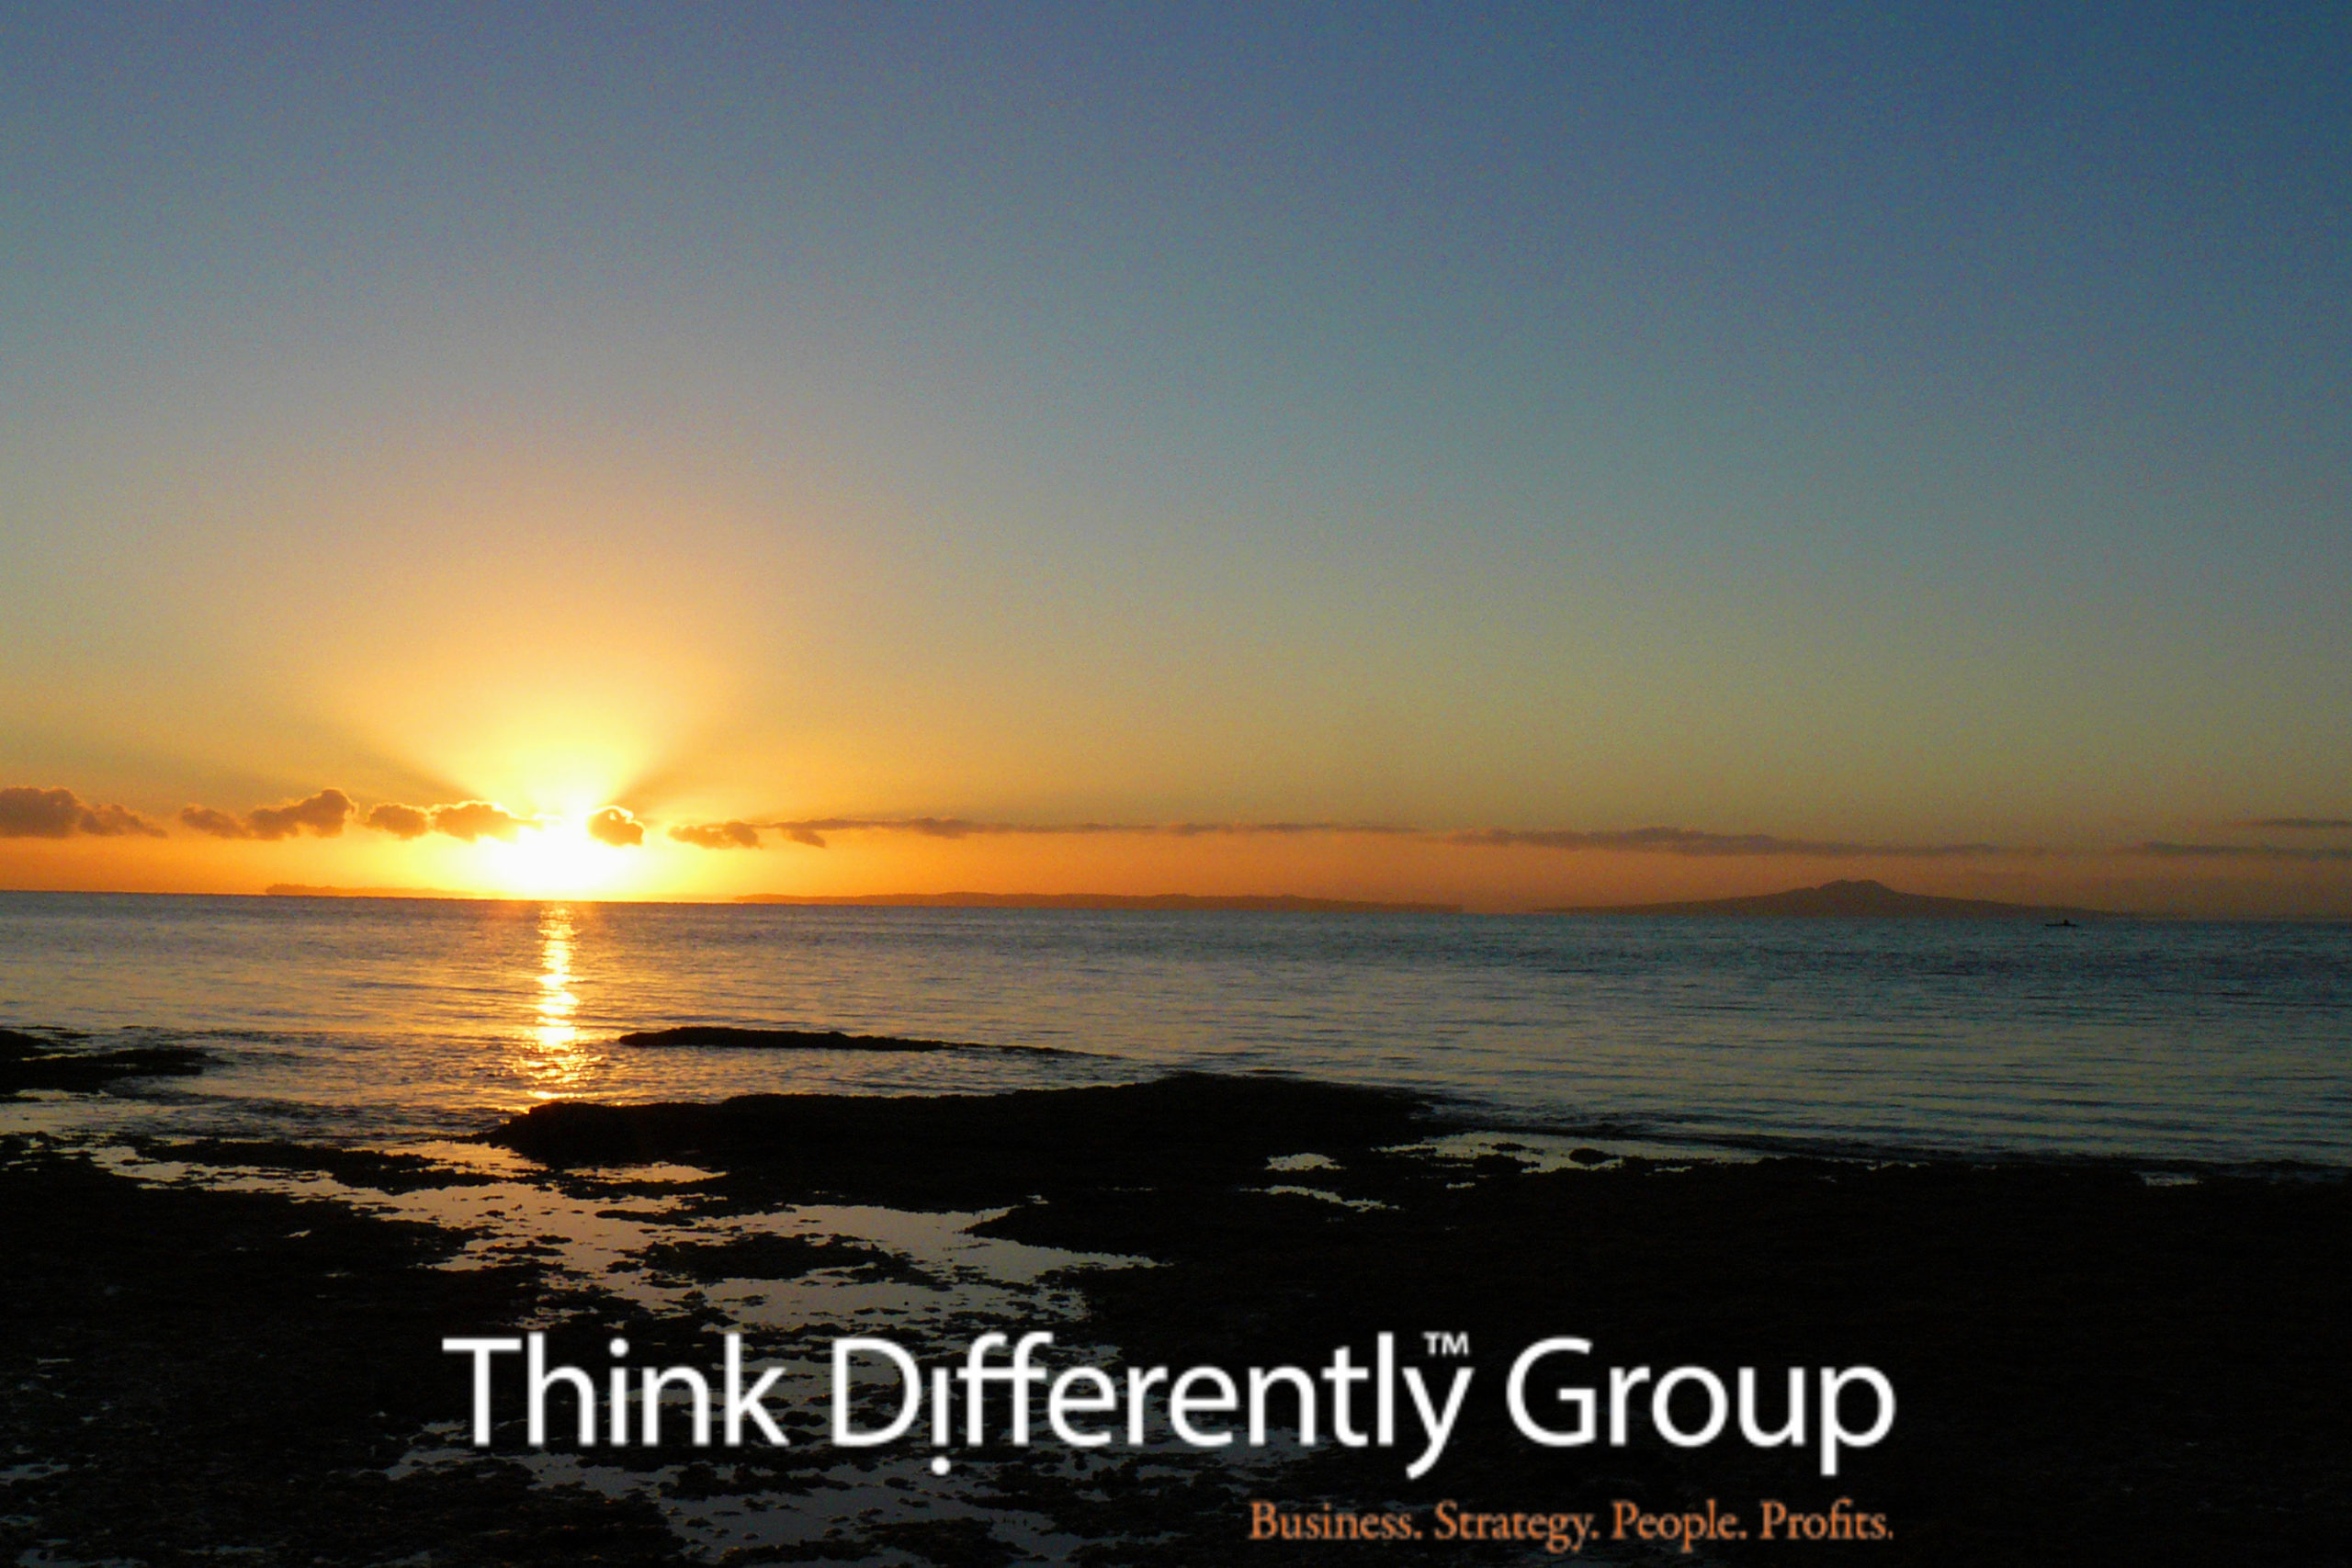 Making Changes by Thinking Differently